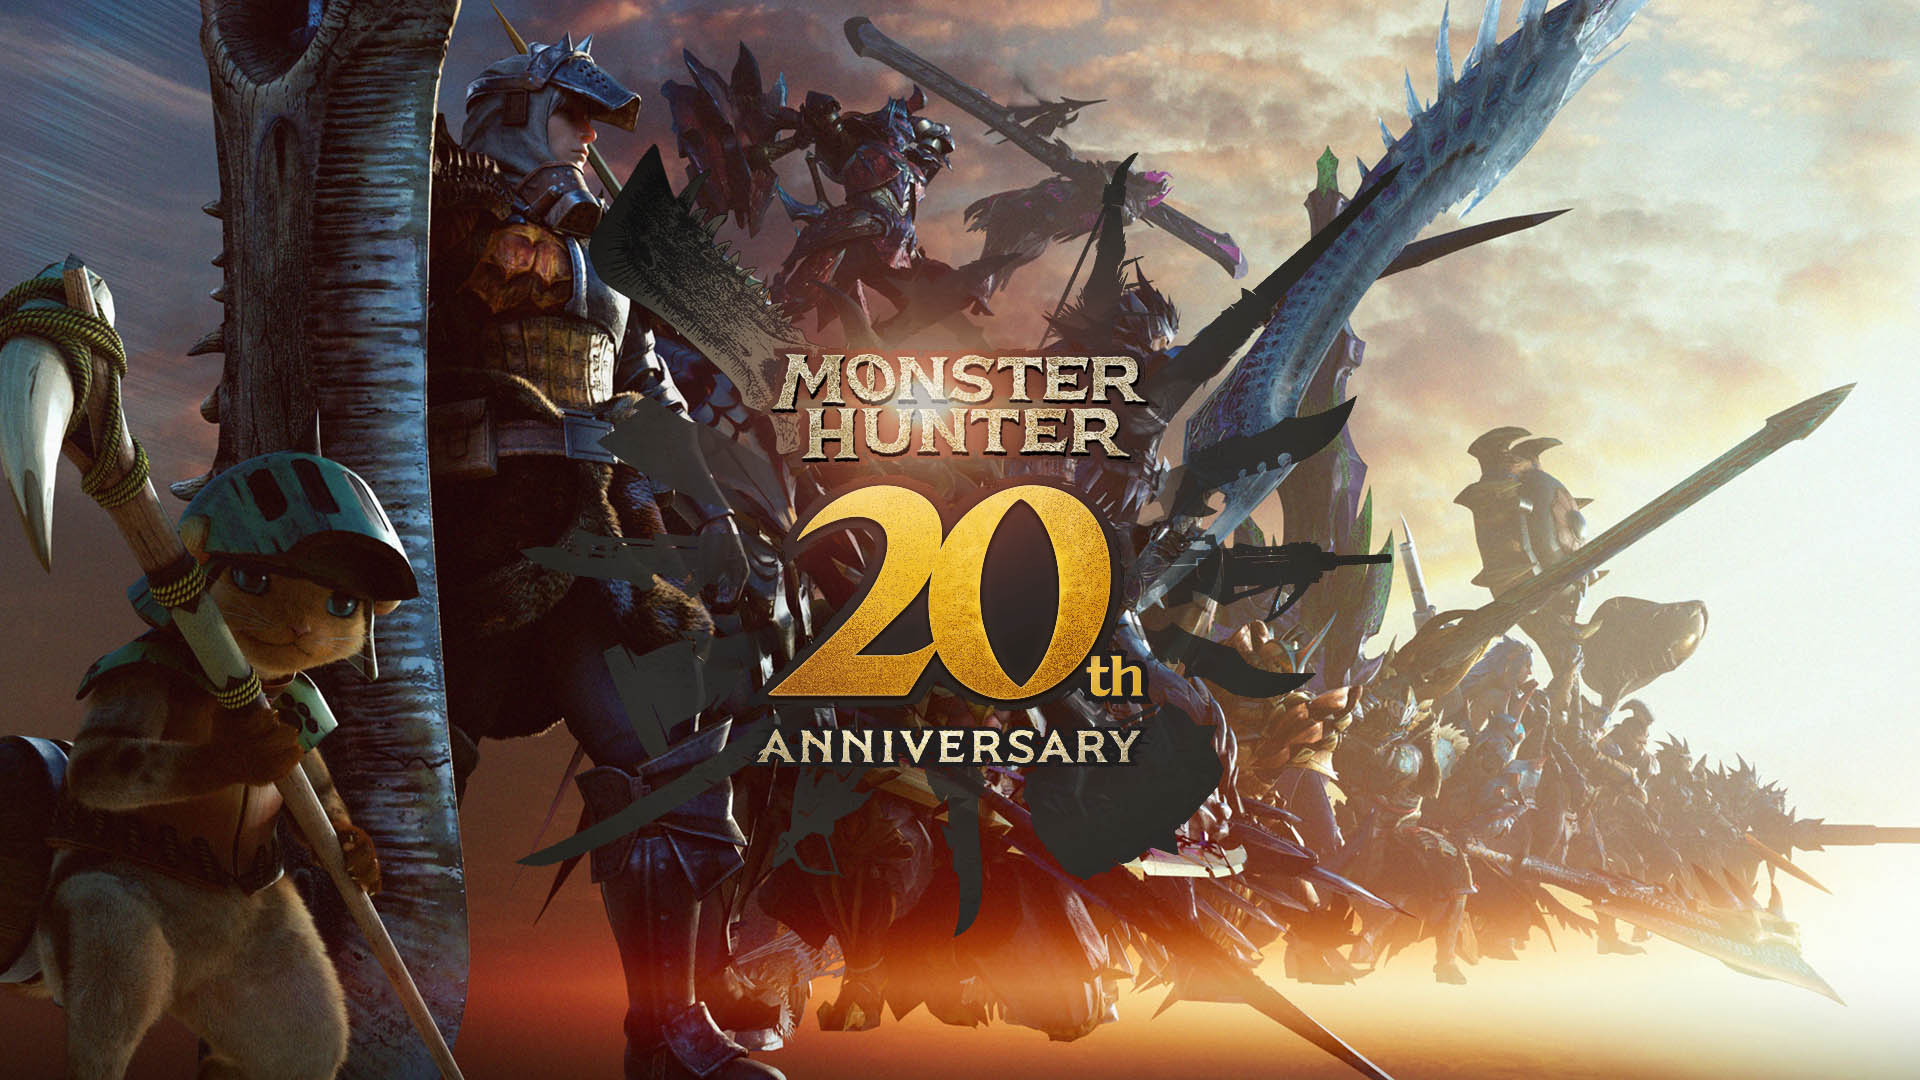 Monster Hunter series 20th anniversary site launched